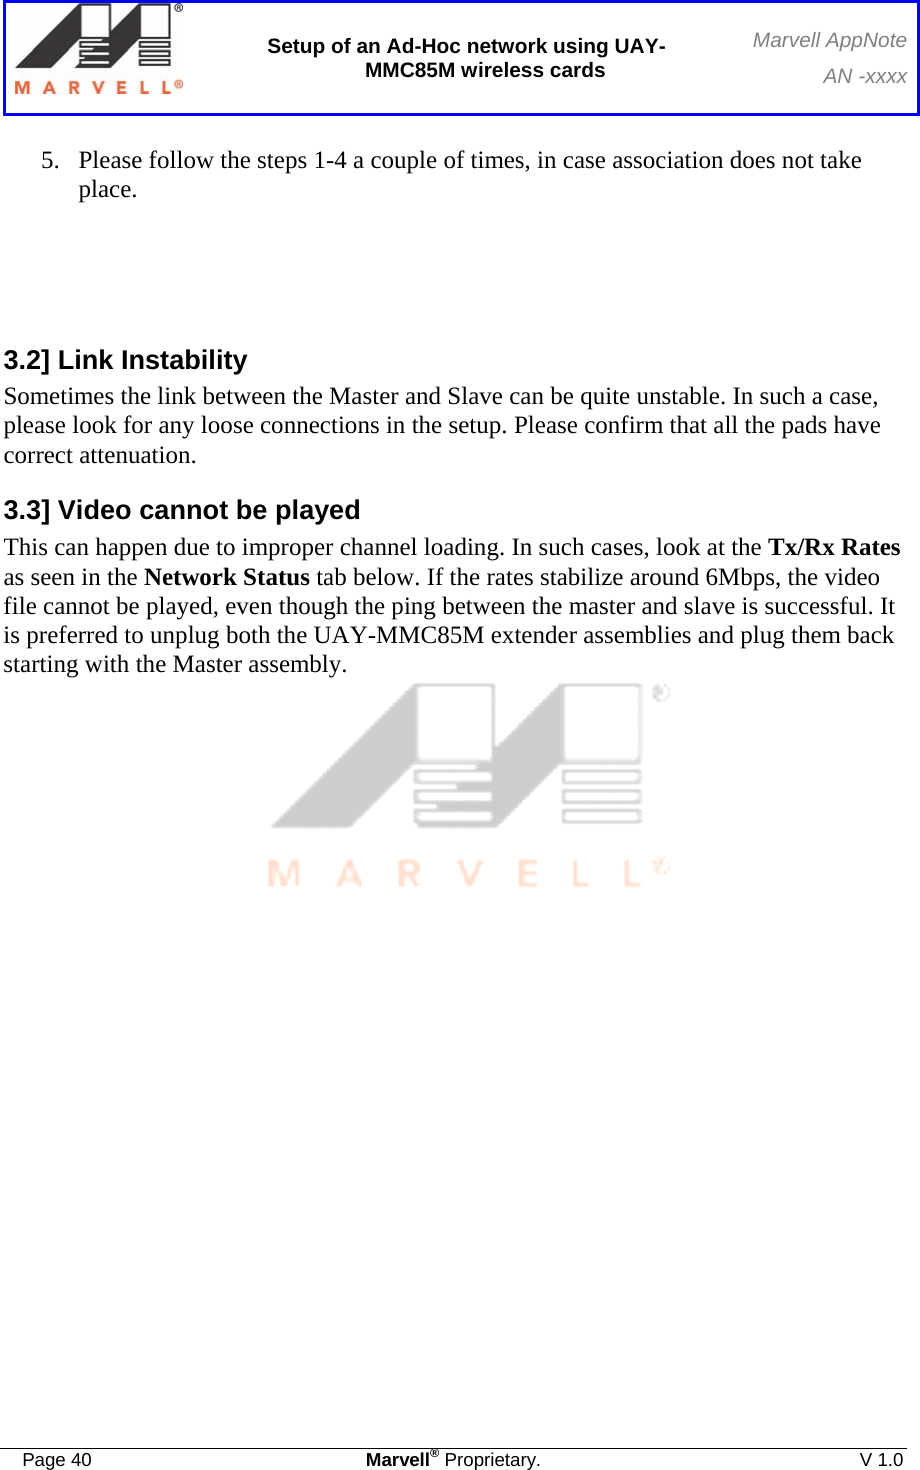  Setup of an Ad-Hoc network using UAY-MMC85M wireless cards Marvell AppNoteAN -xxxx  Page 40  Marvell® Proprietary.  V 1.0  5. Please follow the steps 1-4 a couple of times, in case association does not take place.    3.2] Link Instability Sometimes the link between the Master and Slave can be quite unstable. In such a case, please look for any loose connections in the setup. Please confirm that all the pads have correct attenuation.  3.3] Video cannot be played This can happen due to improper channel loading. In such cases, look at the Tx/Rx Rates as seen in the Network Status tab below. If the rates stabilize around 6Mbps, the video file cannot be played, even though the ping between the master and slave is successful. It is preferred to unplug both the UAY-MMC85M extender assemblies and plug them back starting with the Master assembly.   